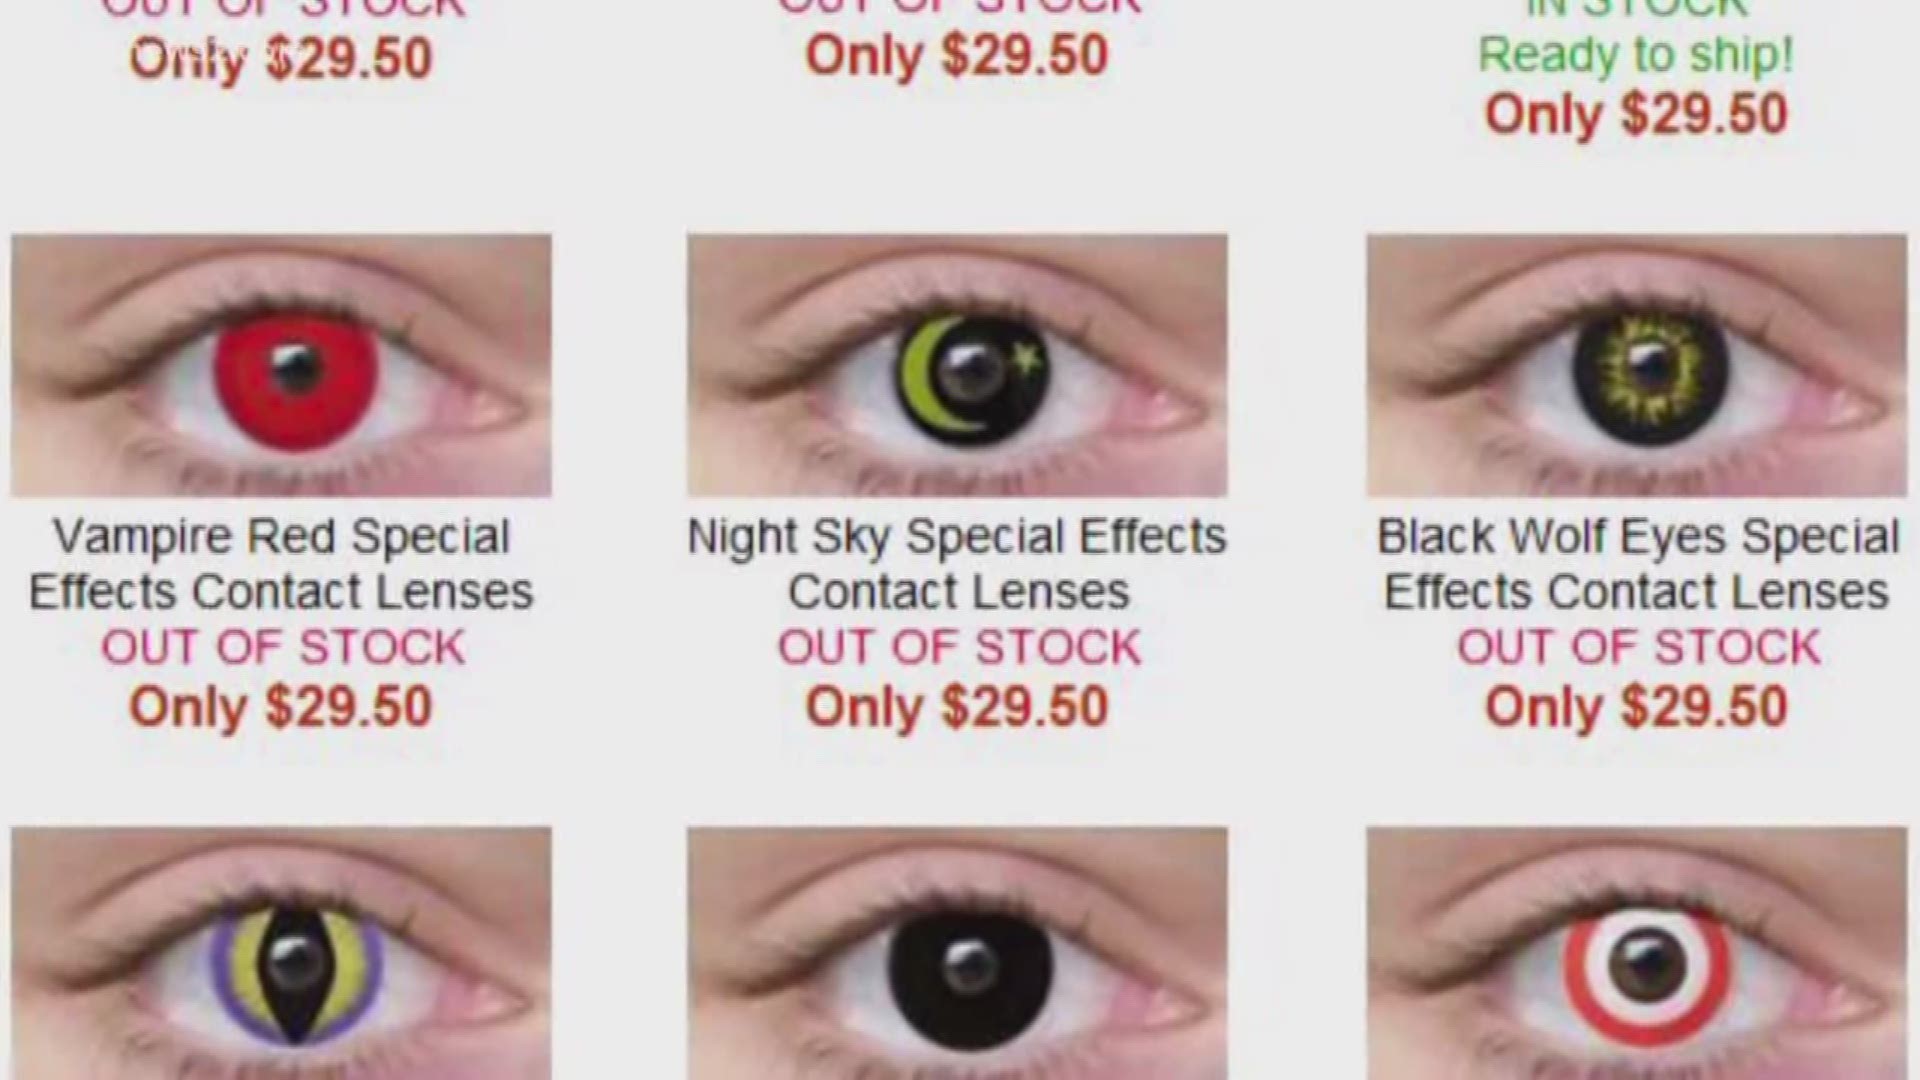 They're Cool, But These Contacts Could Hurt Your Eyes